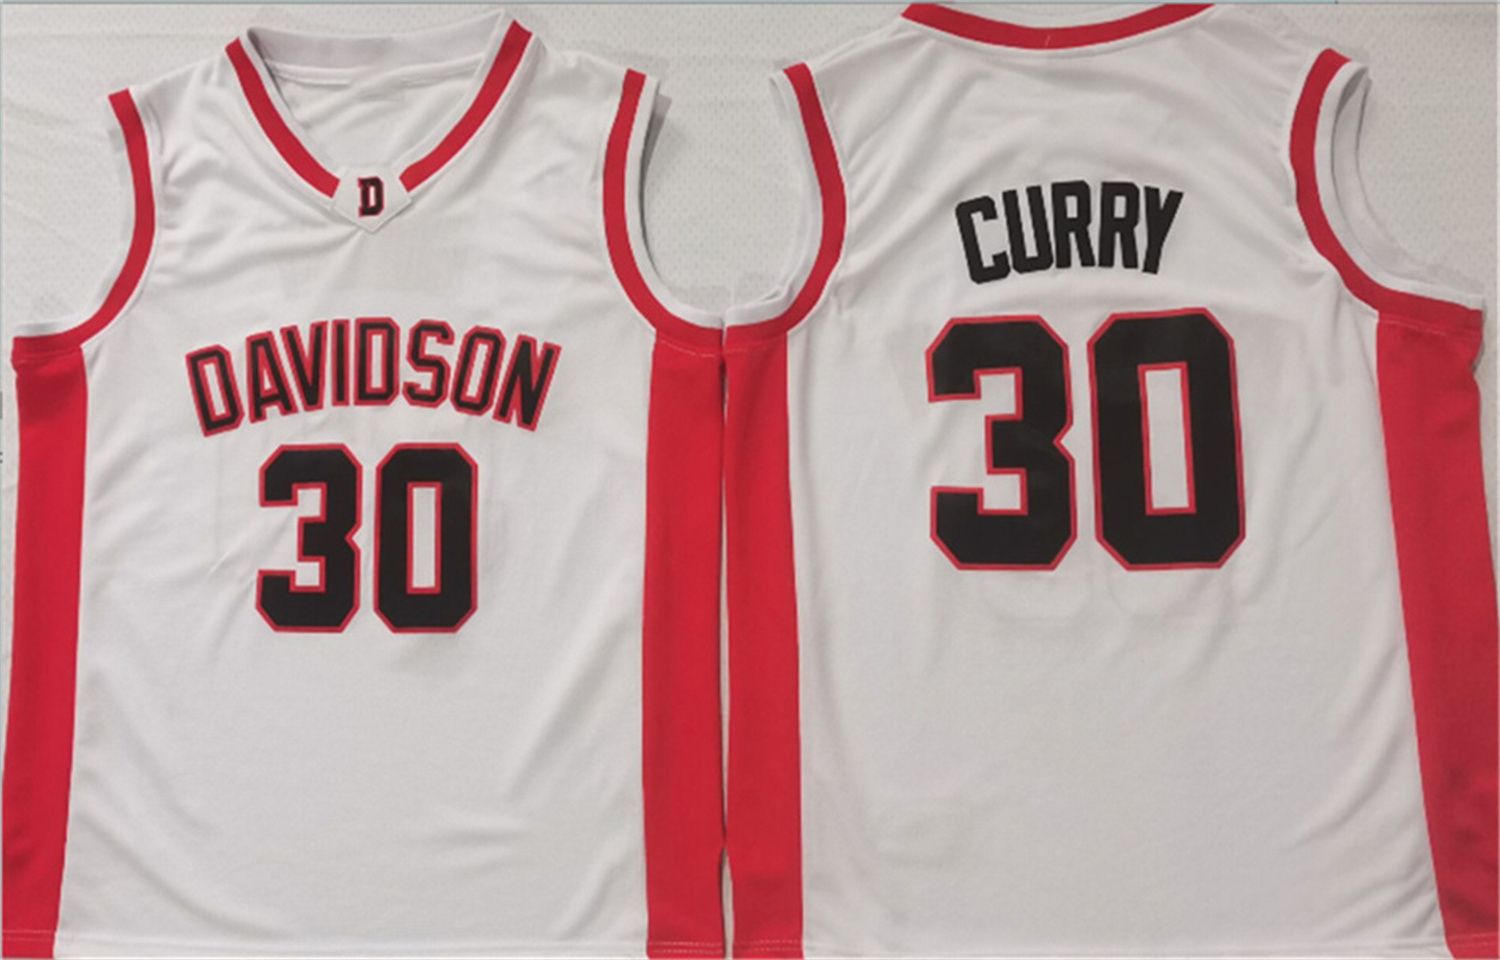 Davidson Wildcats White #30 Curry